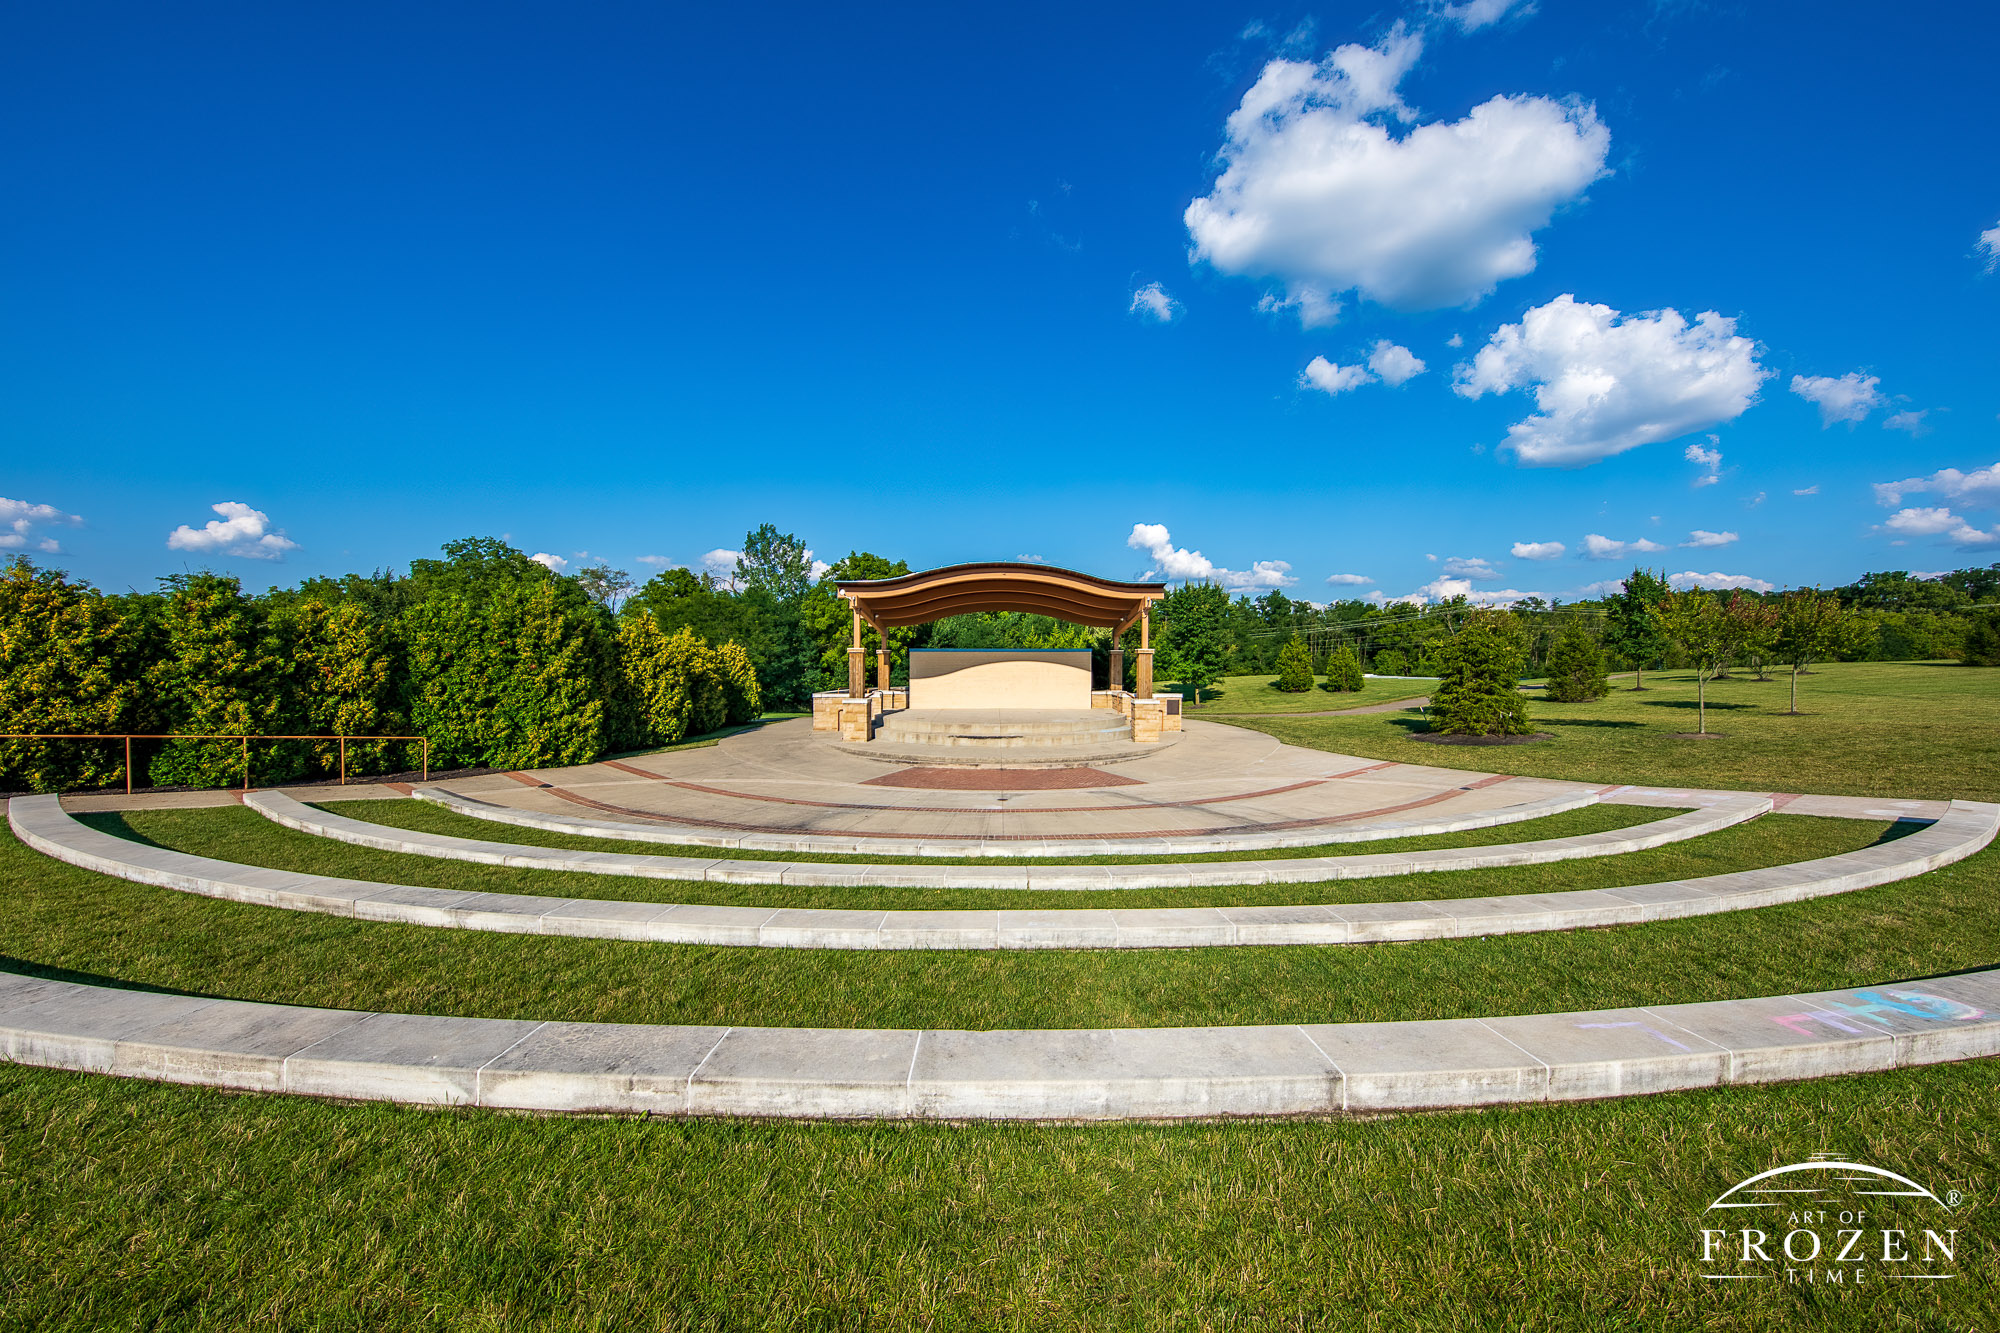 Concentric stone seating platforms arcing around the stage at Eichelberger Amphitheater as cumulous clouds float through the blue sky